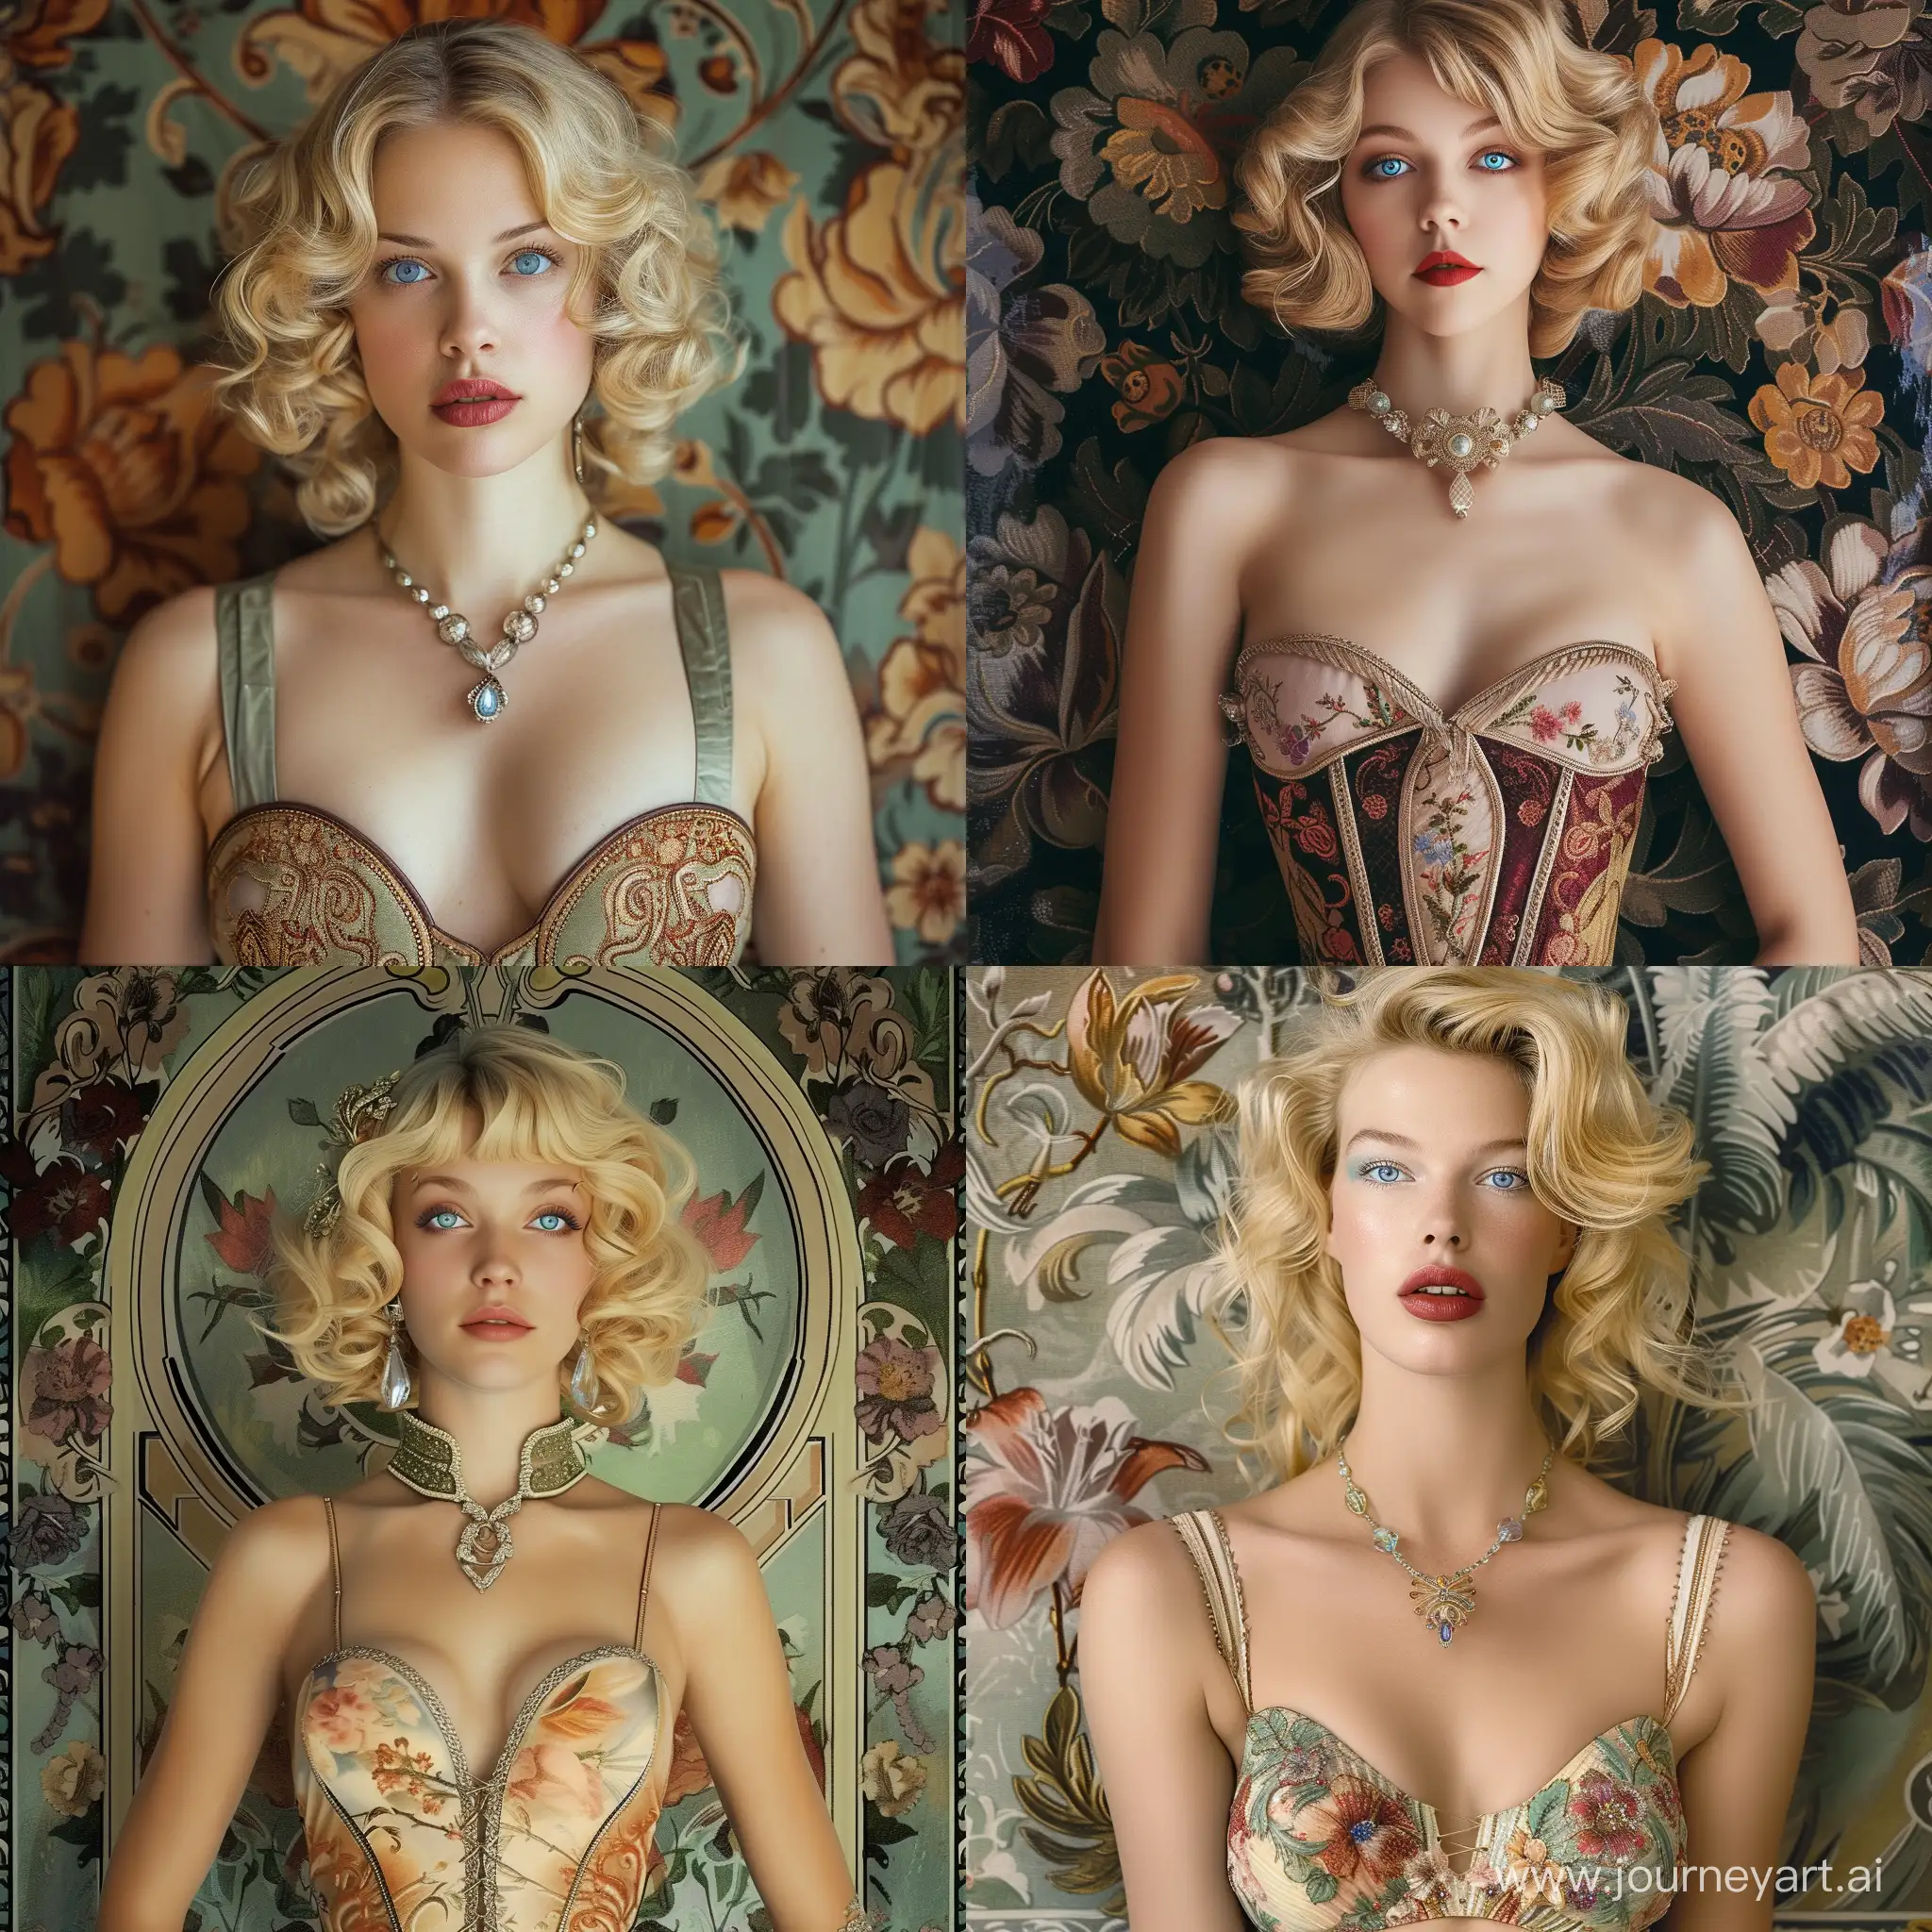 Elegant-ArtNouveau-Style-Blonde-Woman-Adorned-in-Lalique-Jewelry-and-Floral-Motif-Bustier-Dress